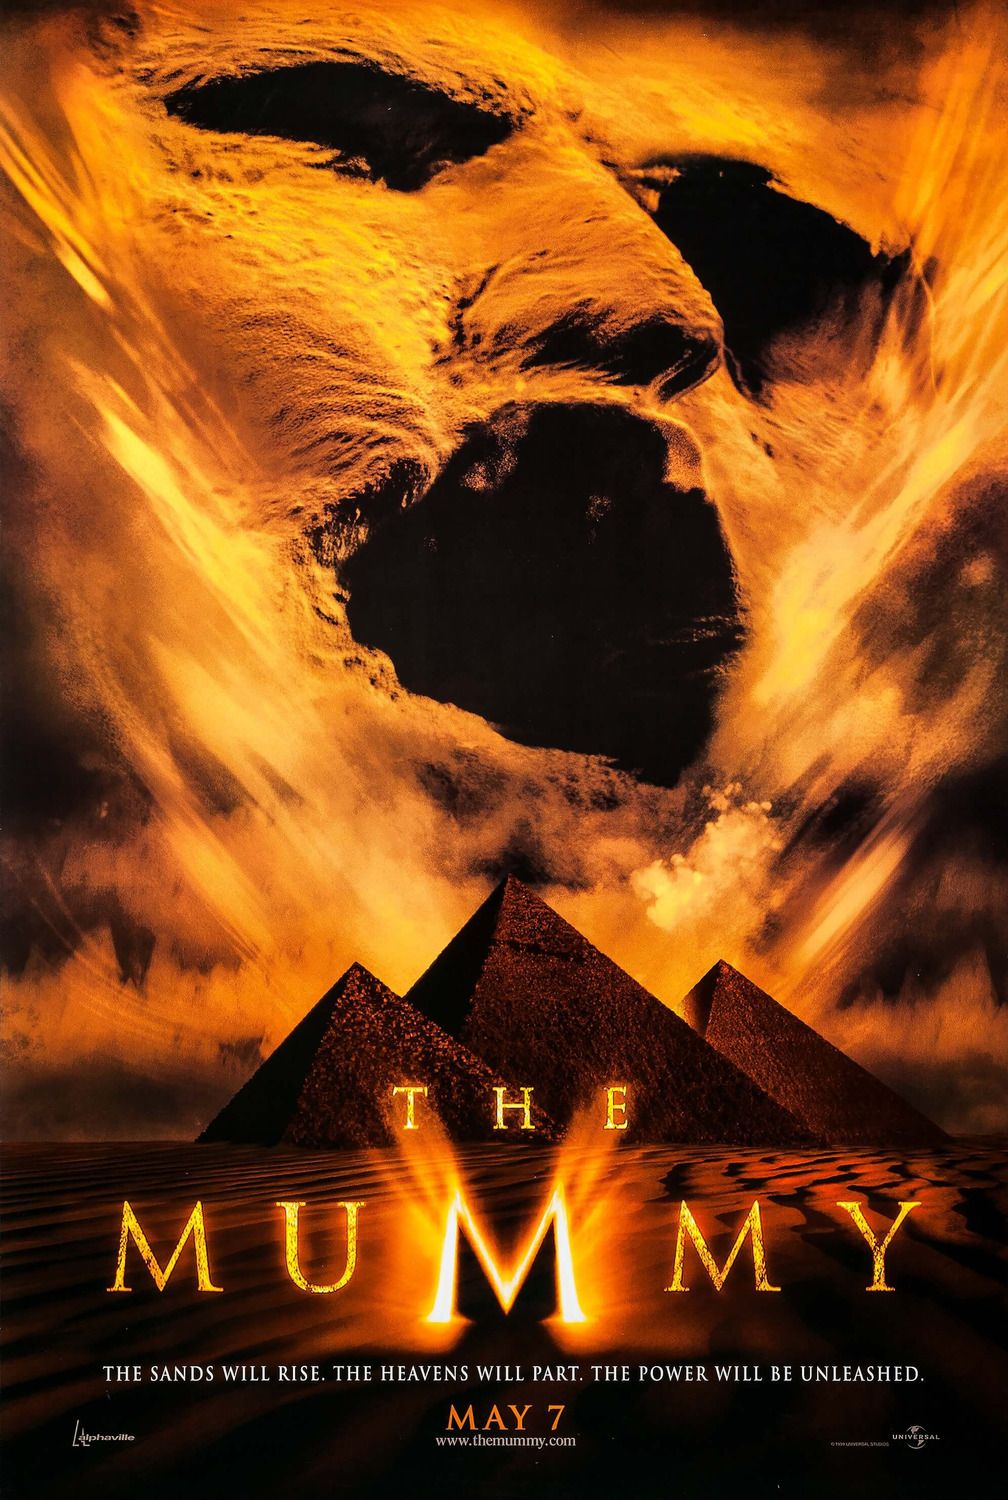 The Pyramids and a mummy desert storm in The Mummy 1999 Film Poster